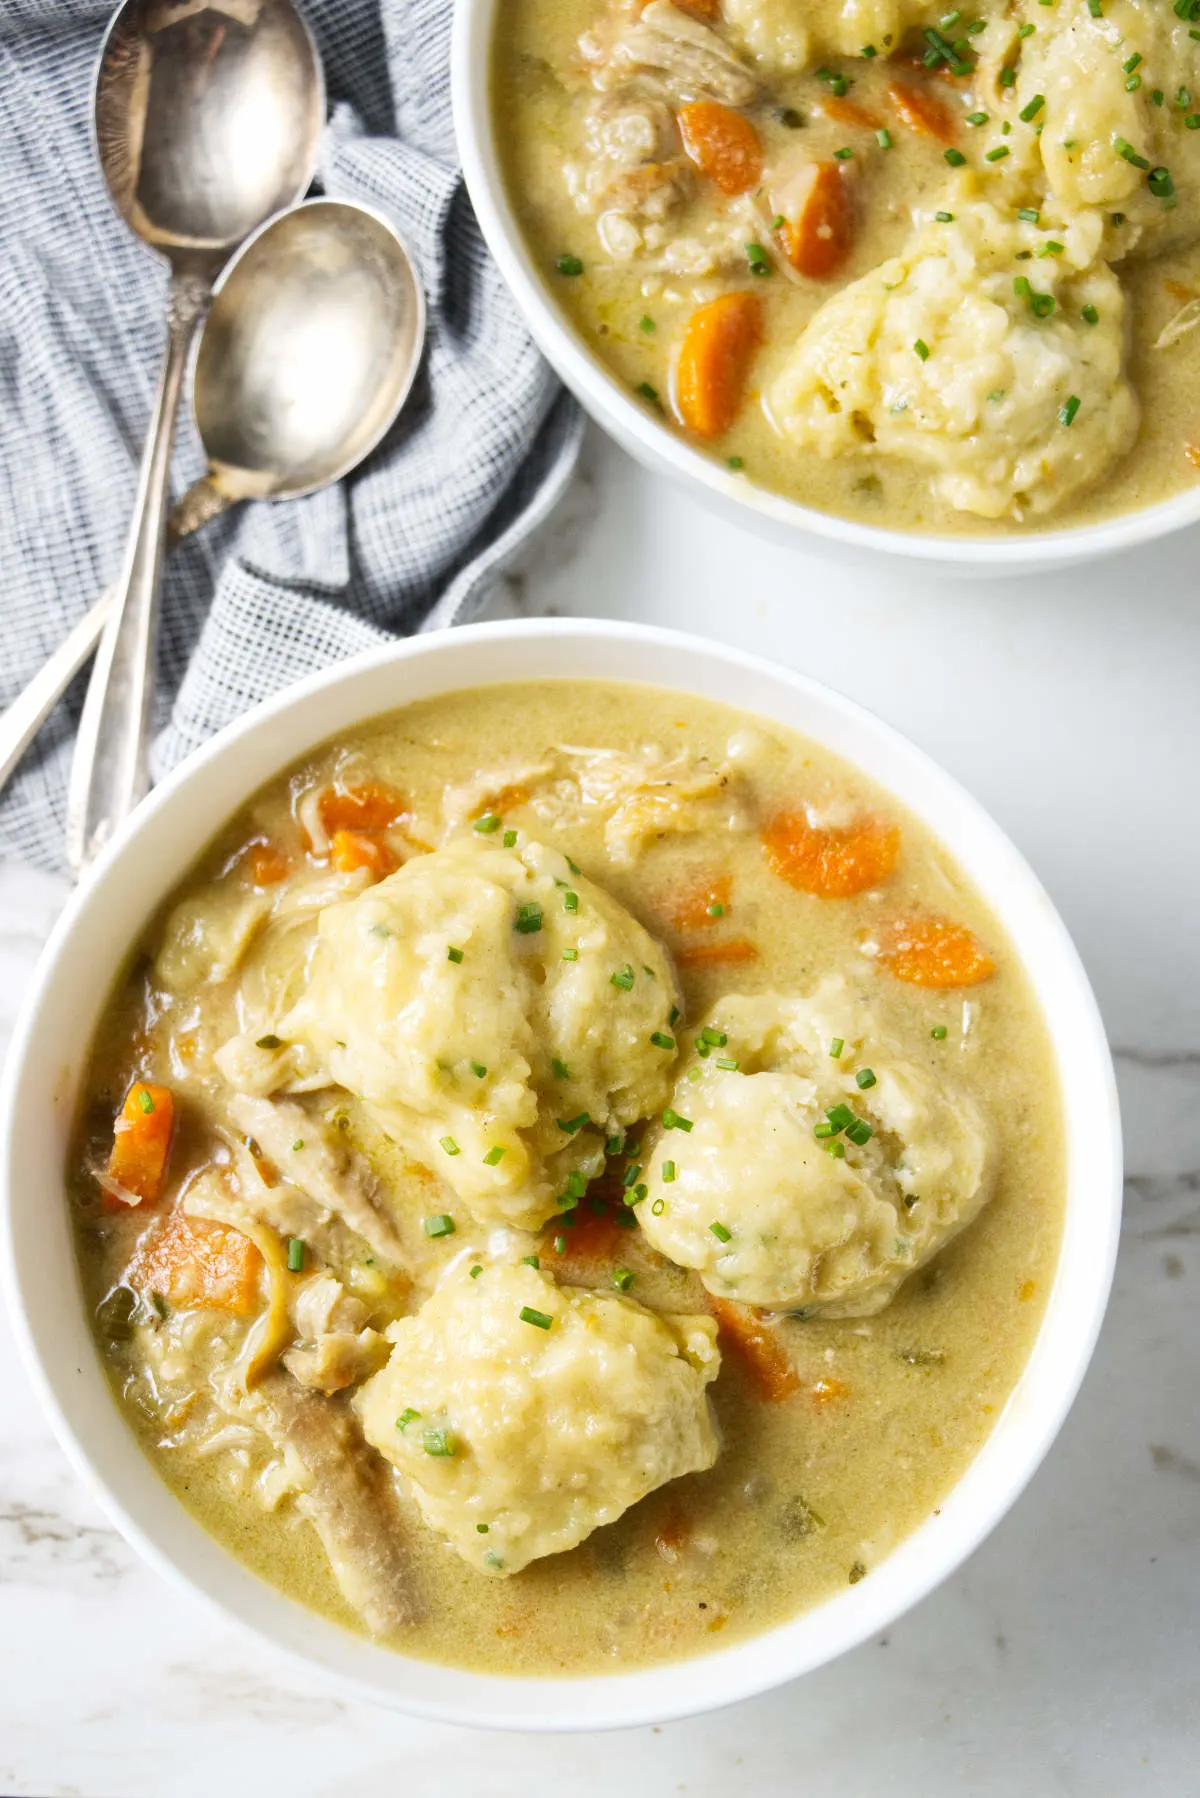 Three large dumplings in a bowl of creamy chicken soup.